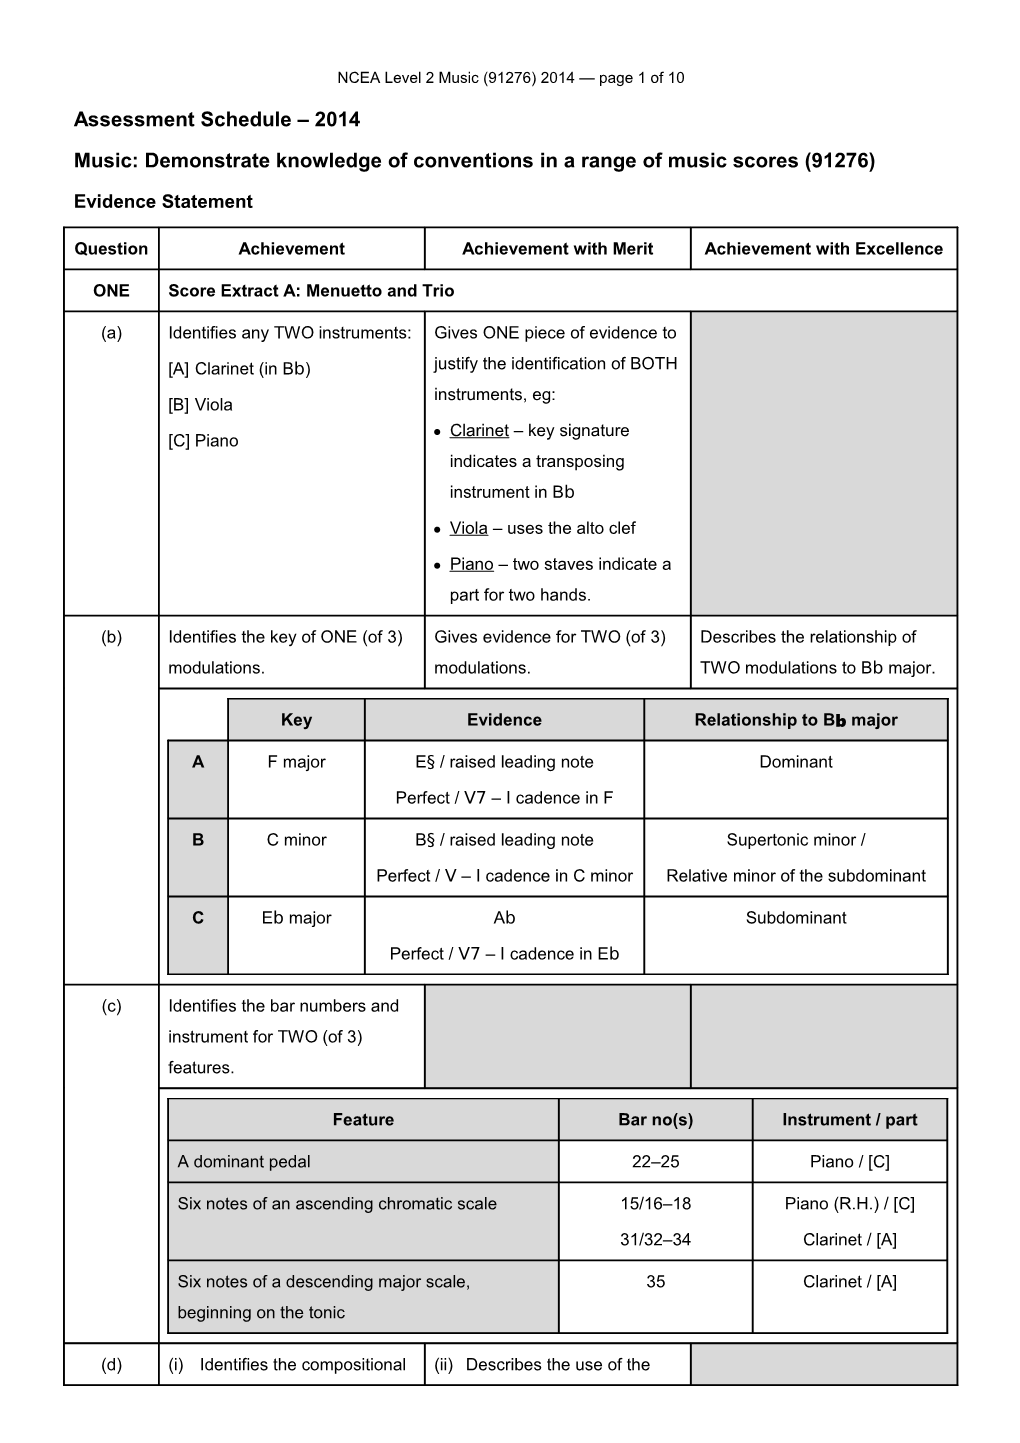 NCEA Level 2 Music (91276) 2014 Assessment Schedule